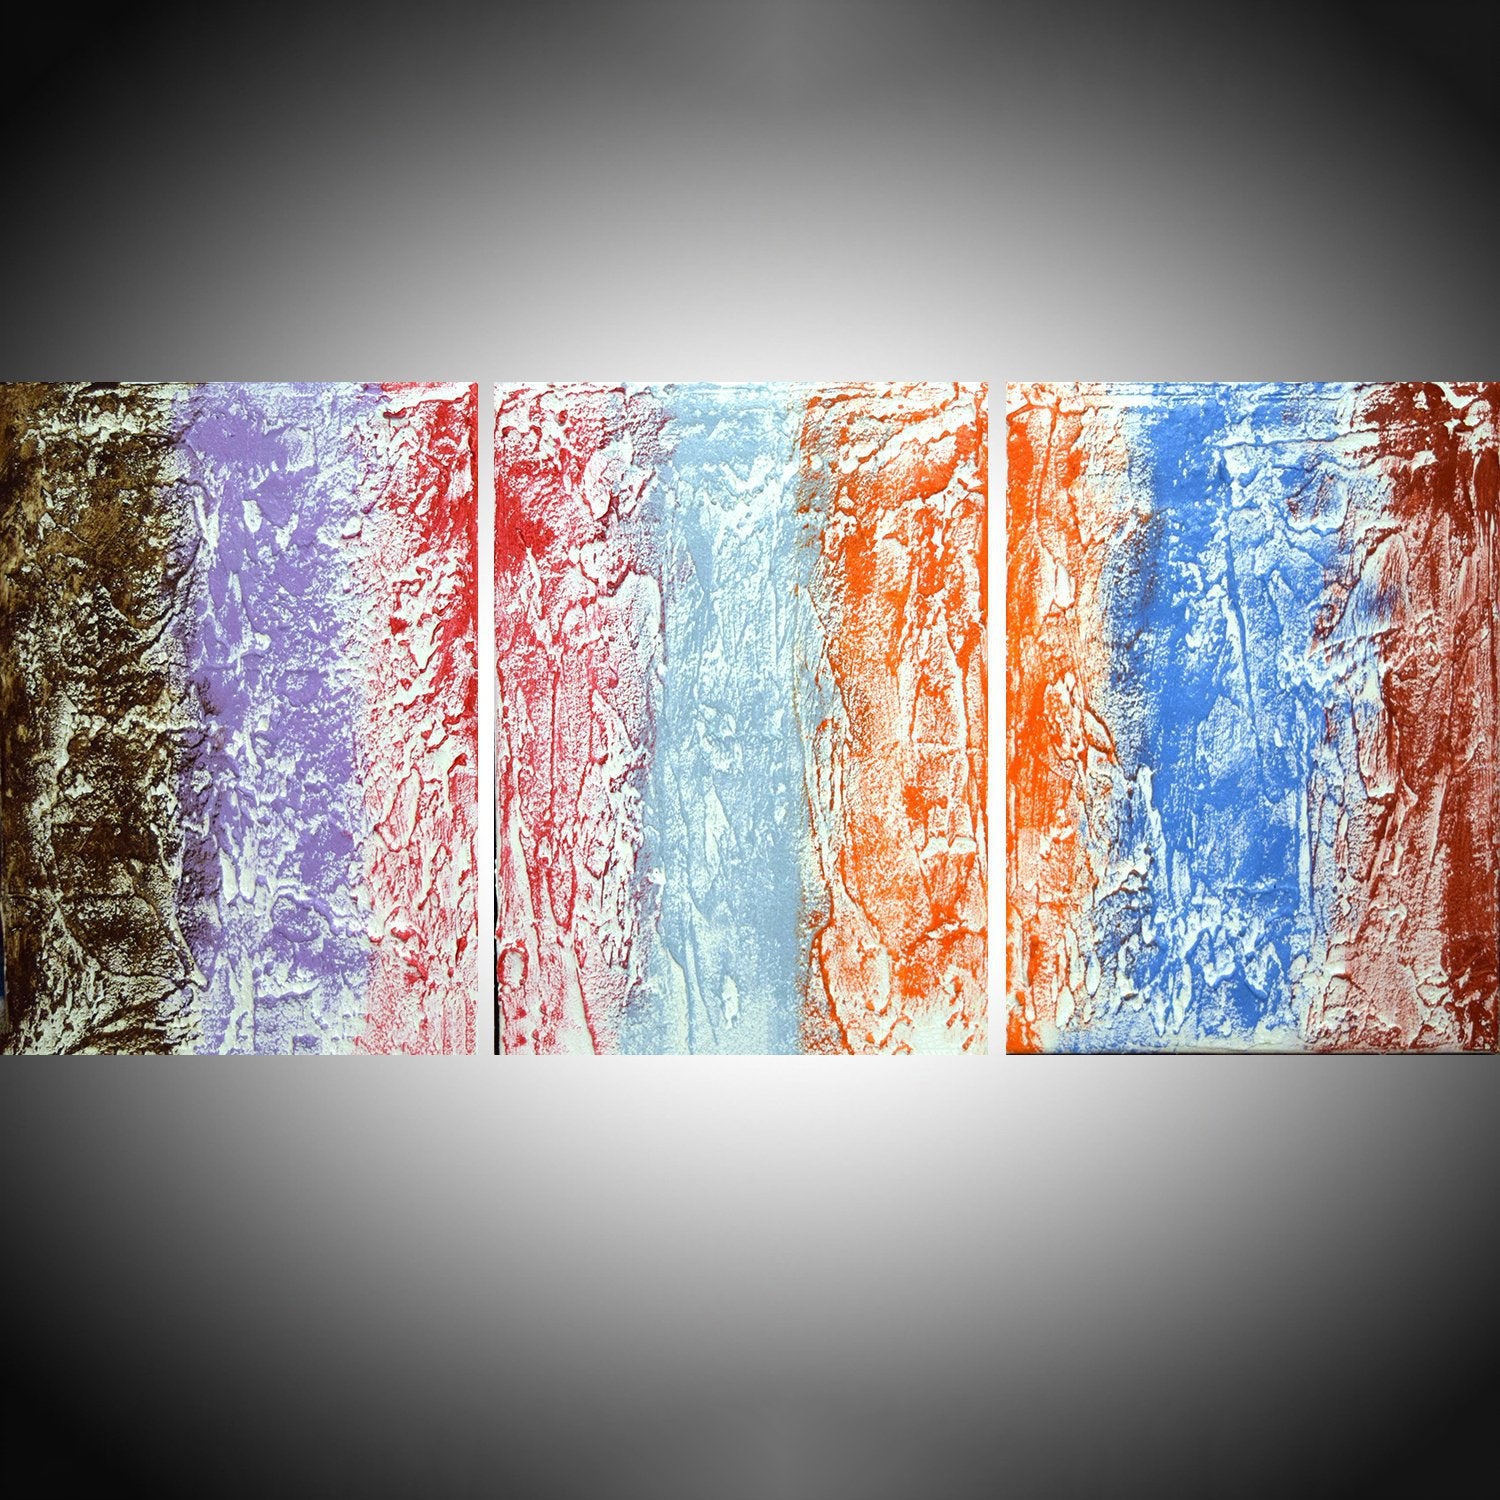 large triptych abstract for sale " Rainbow Abstraction 2 " in 3 big sizes